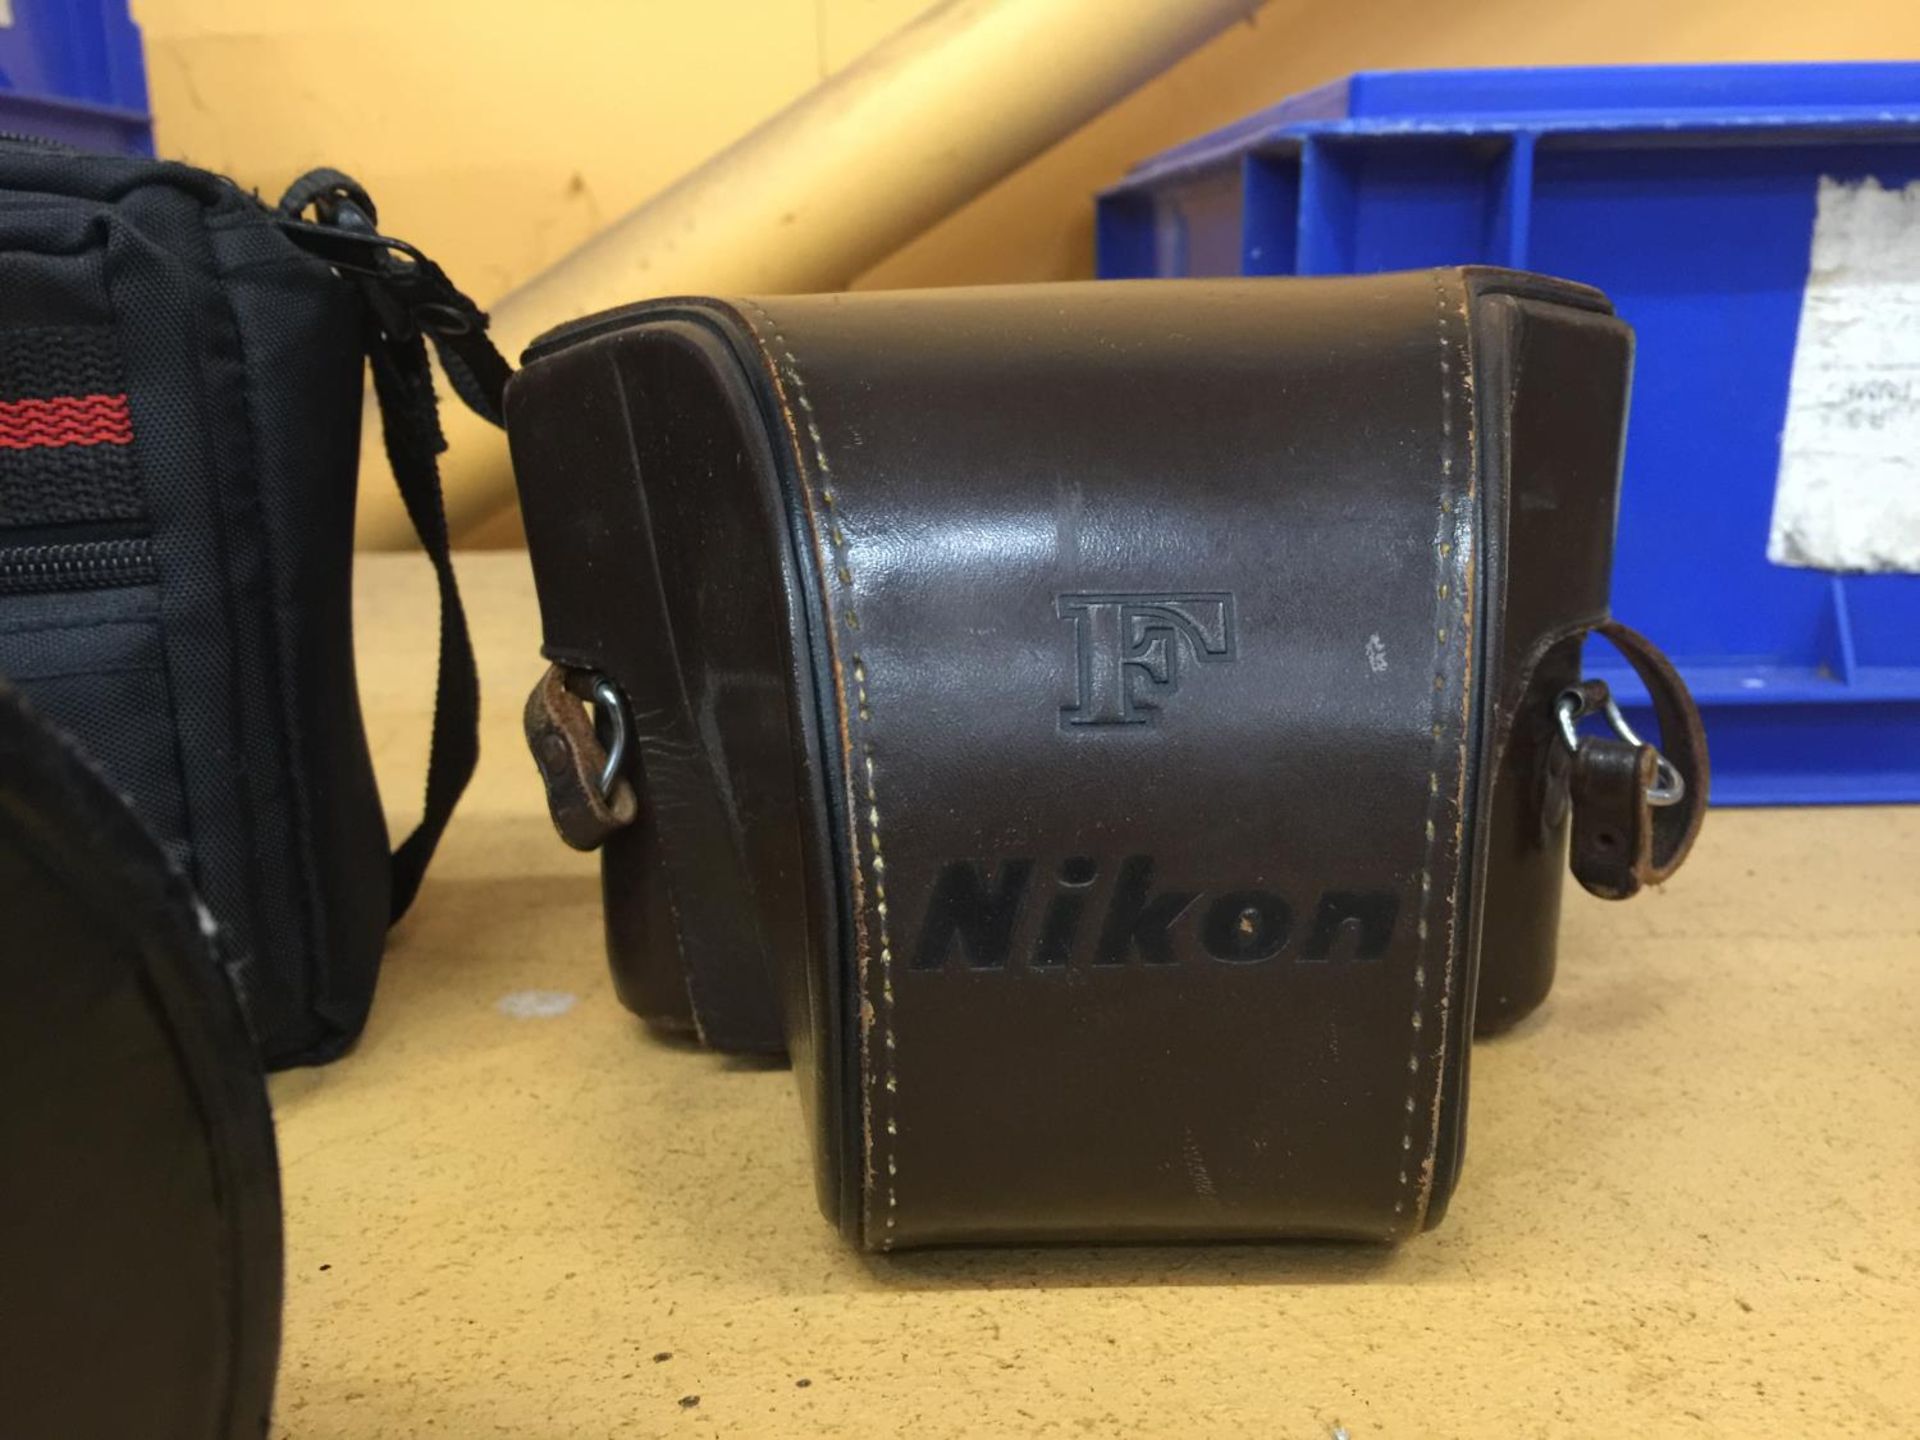 A NIKON TELEPHOTO LENSE WITH BAG AND CASE NIKKOR ED 180 MM 1:28 3880 069 TOGETHER WITH VINTAGE NIKON - Image 3 of 4